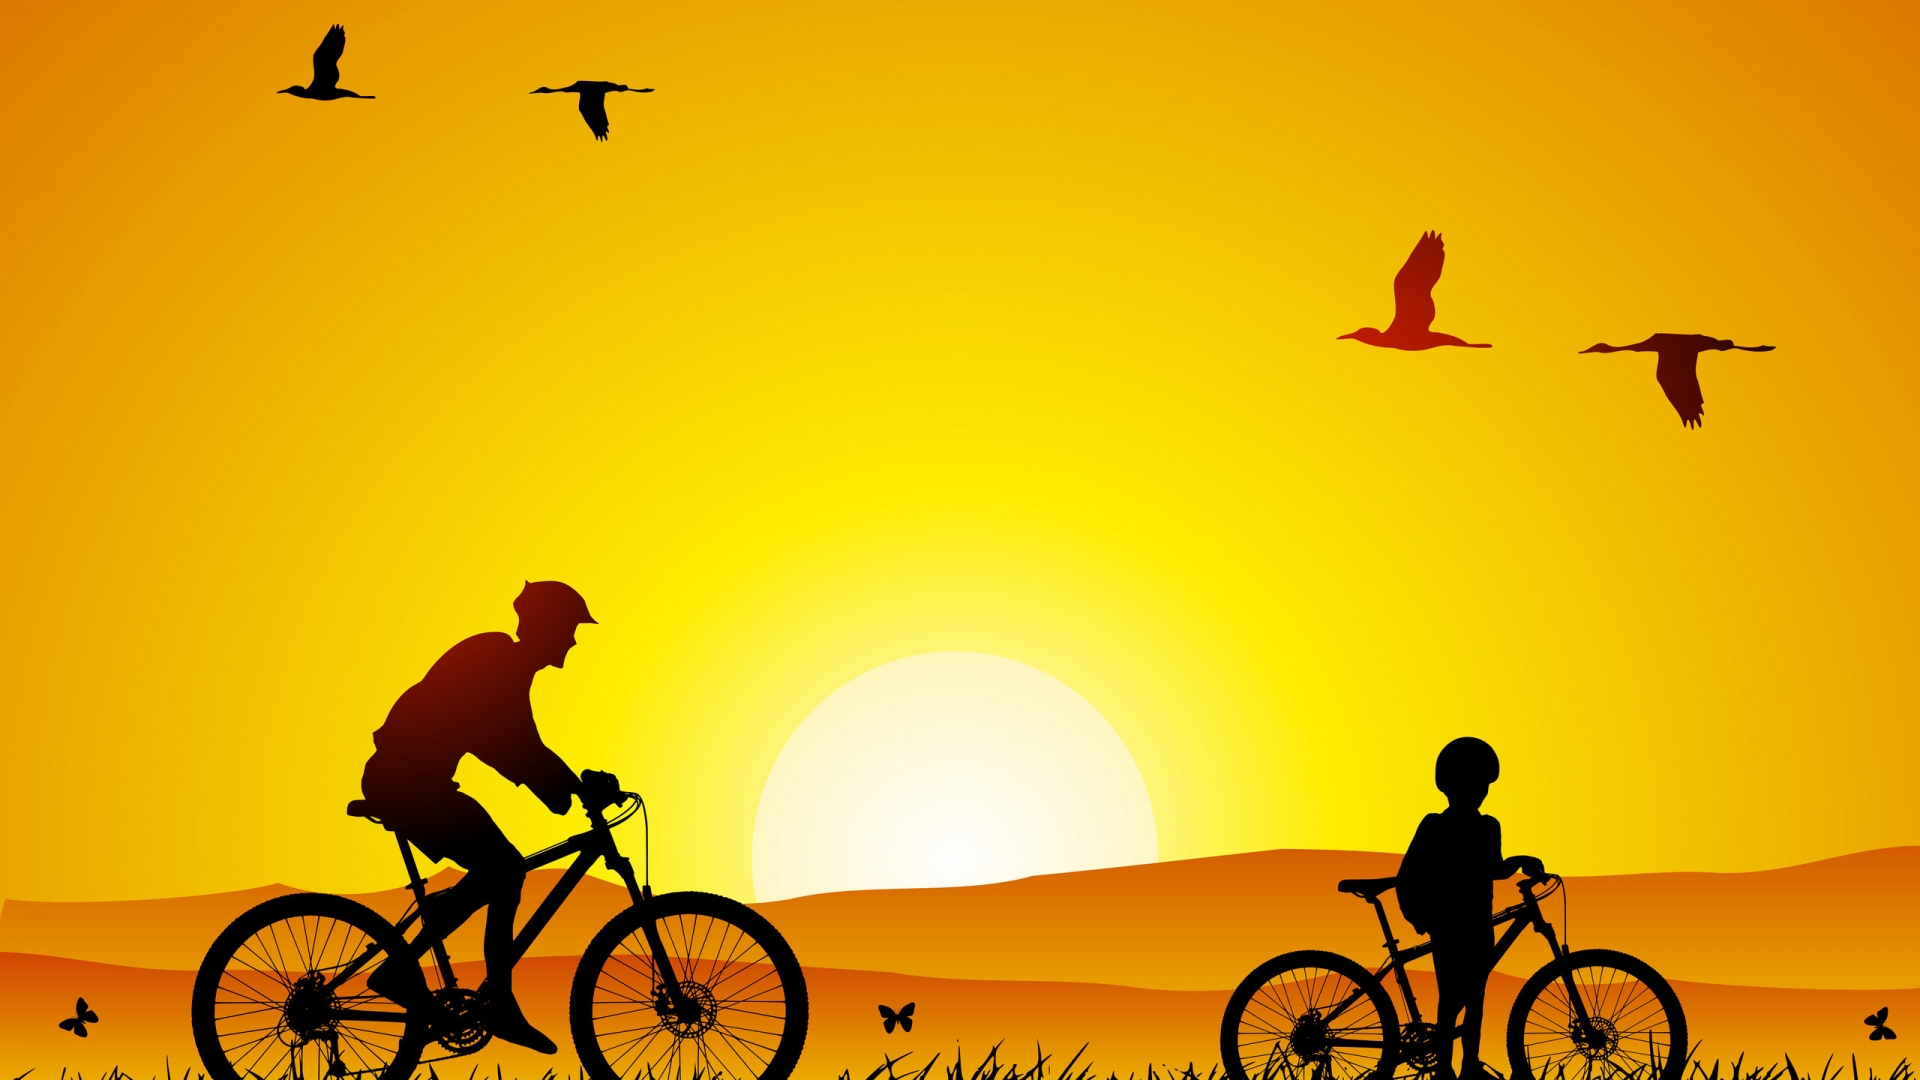 A bicycle ride for 1920 x 1080 HDTV 1080p resolution